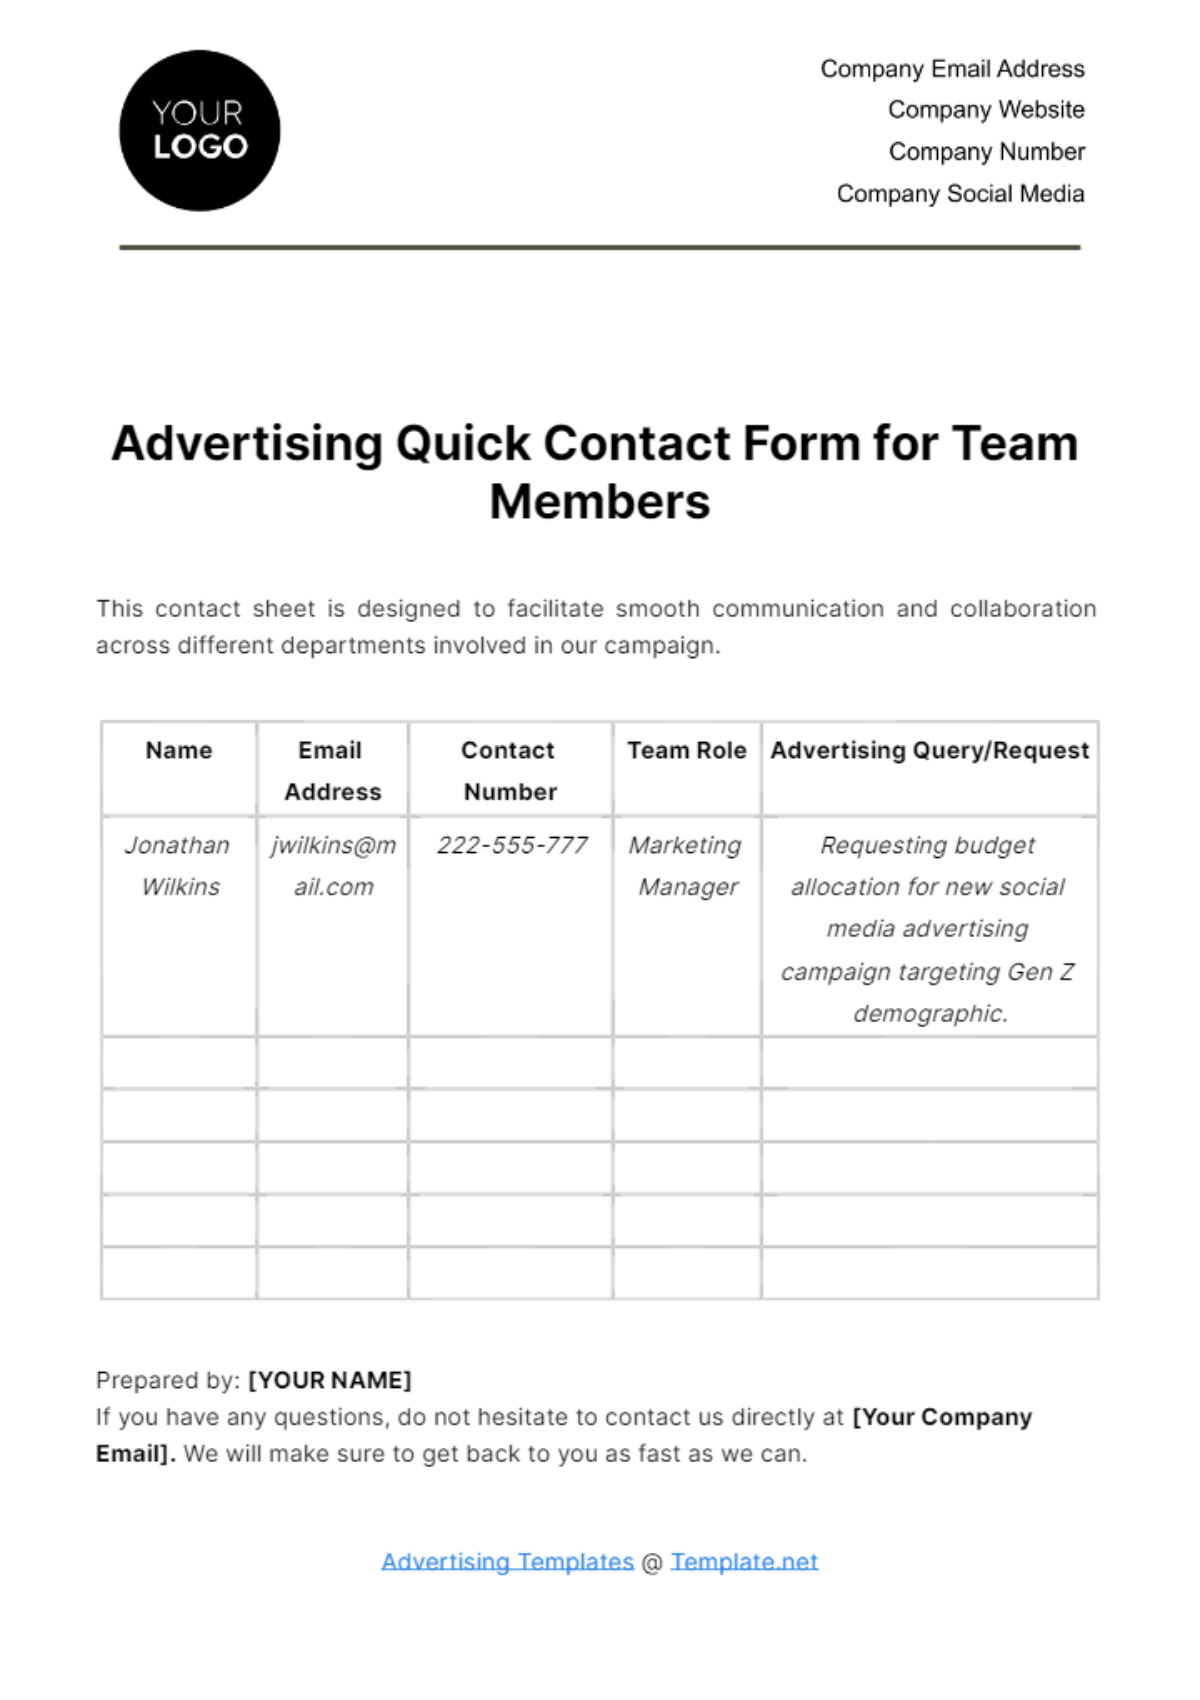 Advertising Quick Contact Form for Team Members Template